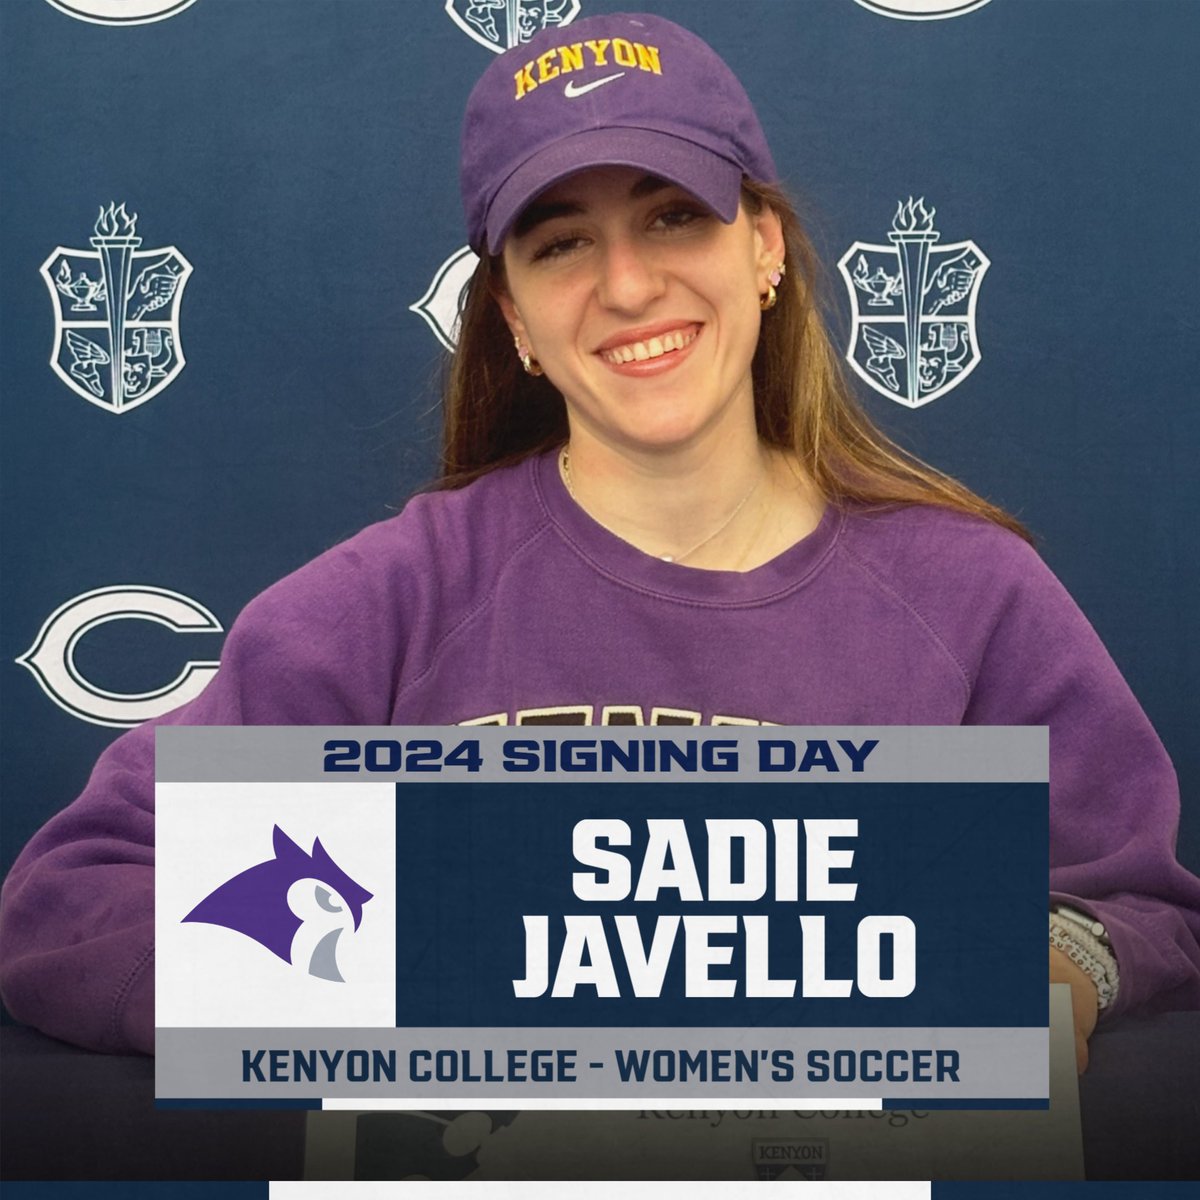 Congratulations to Sadie Javello who has committed to play soccer for Kenyon College next year! Best of Luck as you continue your athletic career! @ChathamCougars @Athletics_CHS @ChathamsTAP @dailyrecordspts @ChathamCourier1 @ChathamHS @KenyonSports